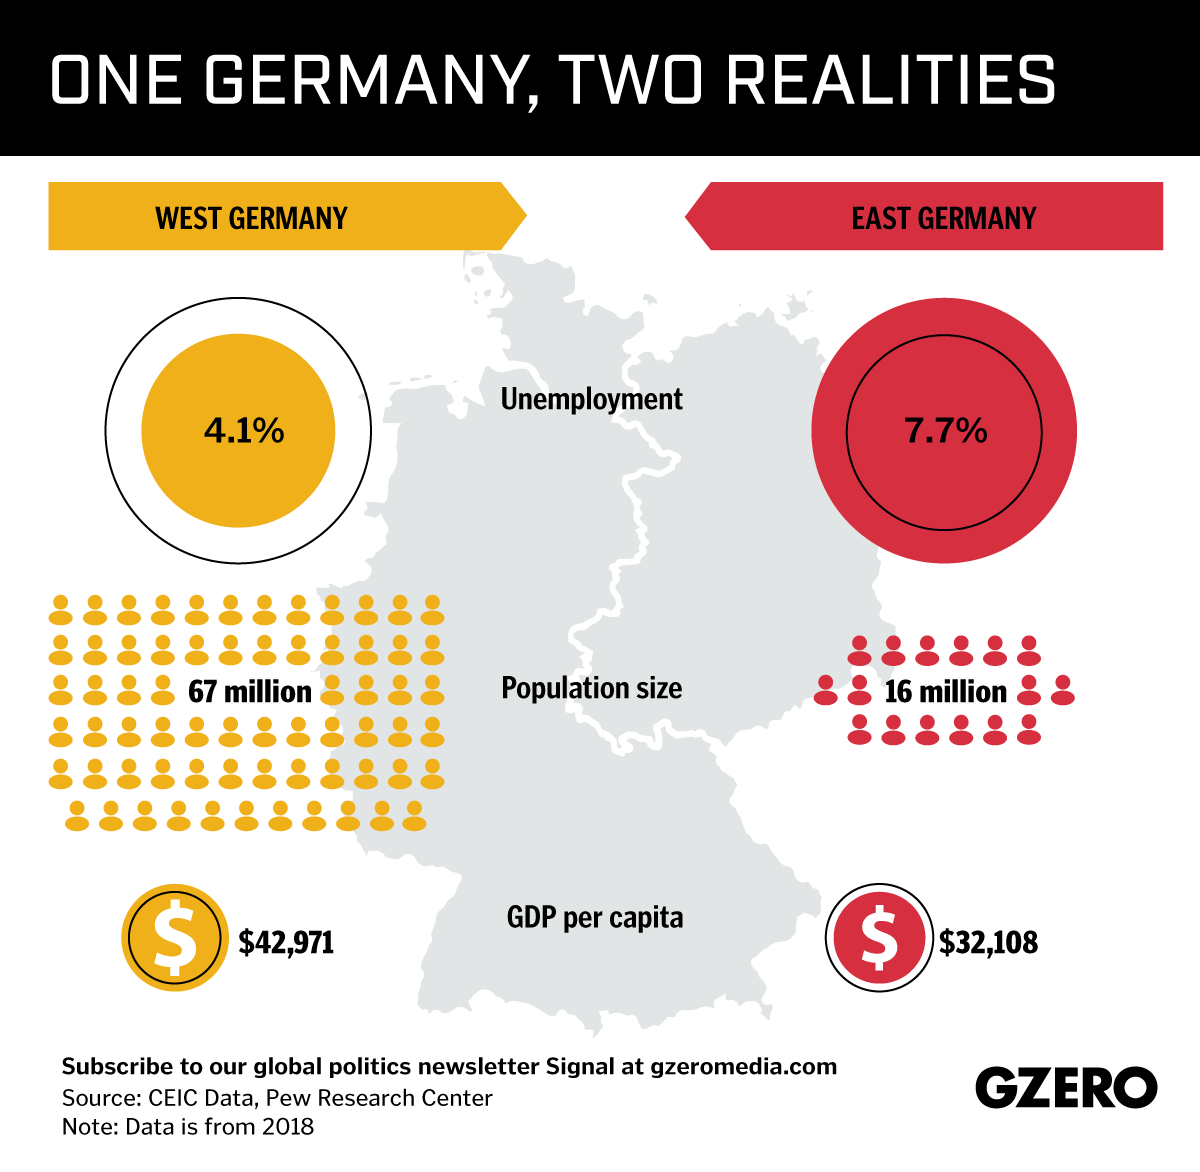 Graphic Truth: One Germany, two realities